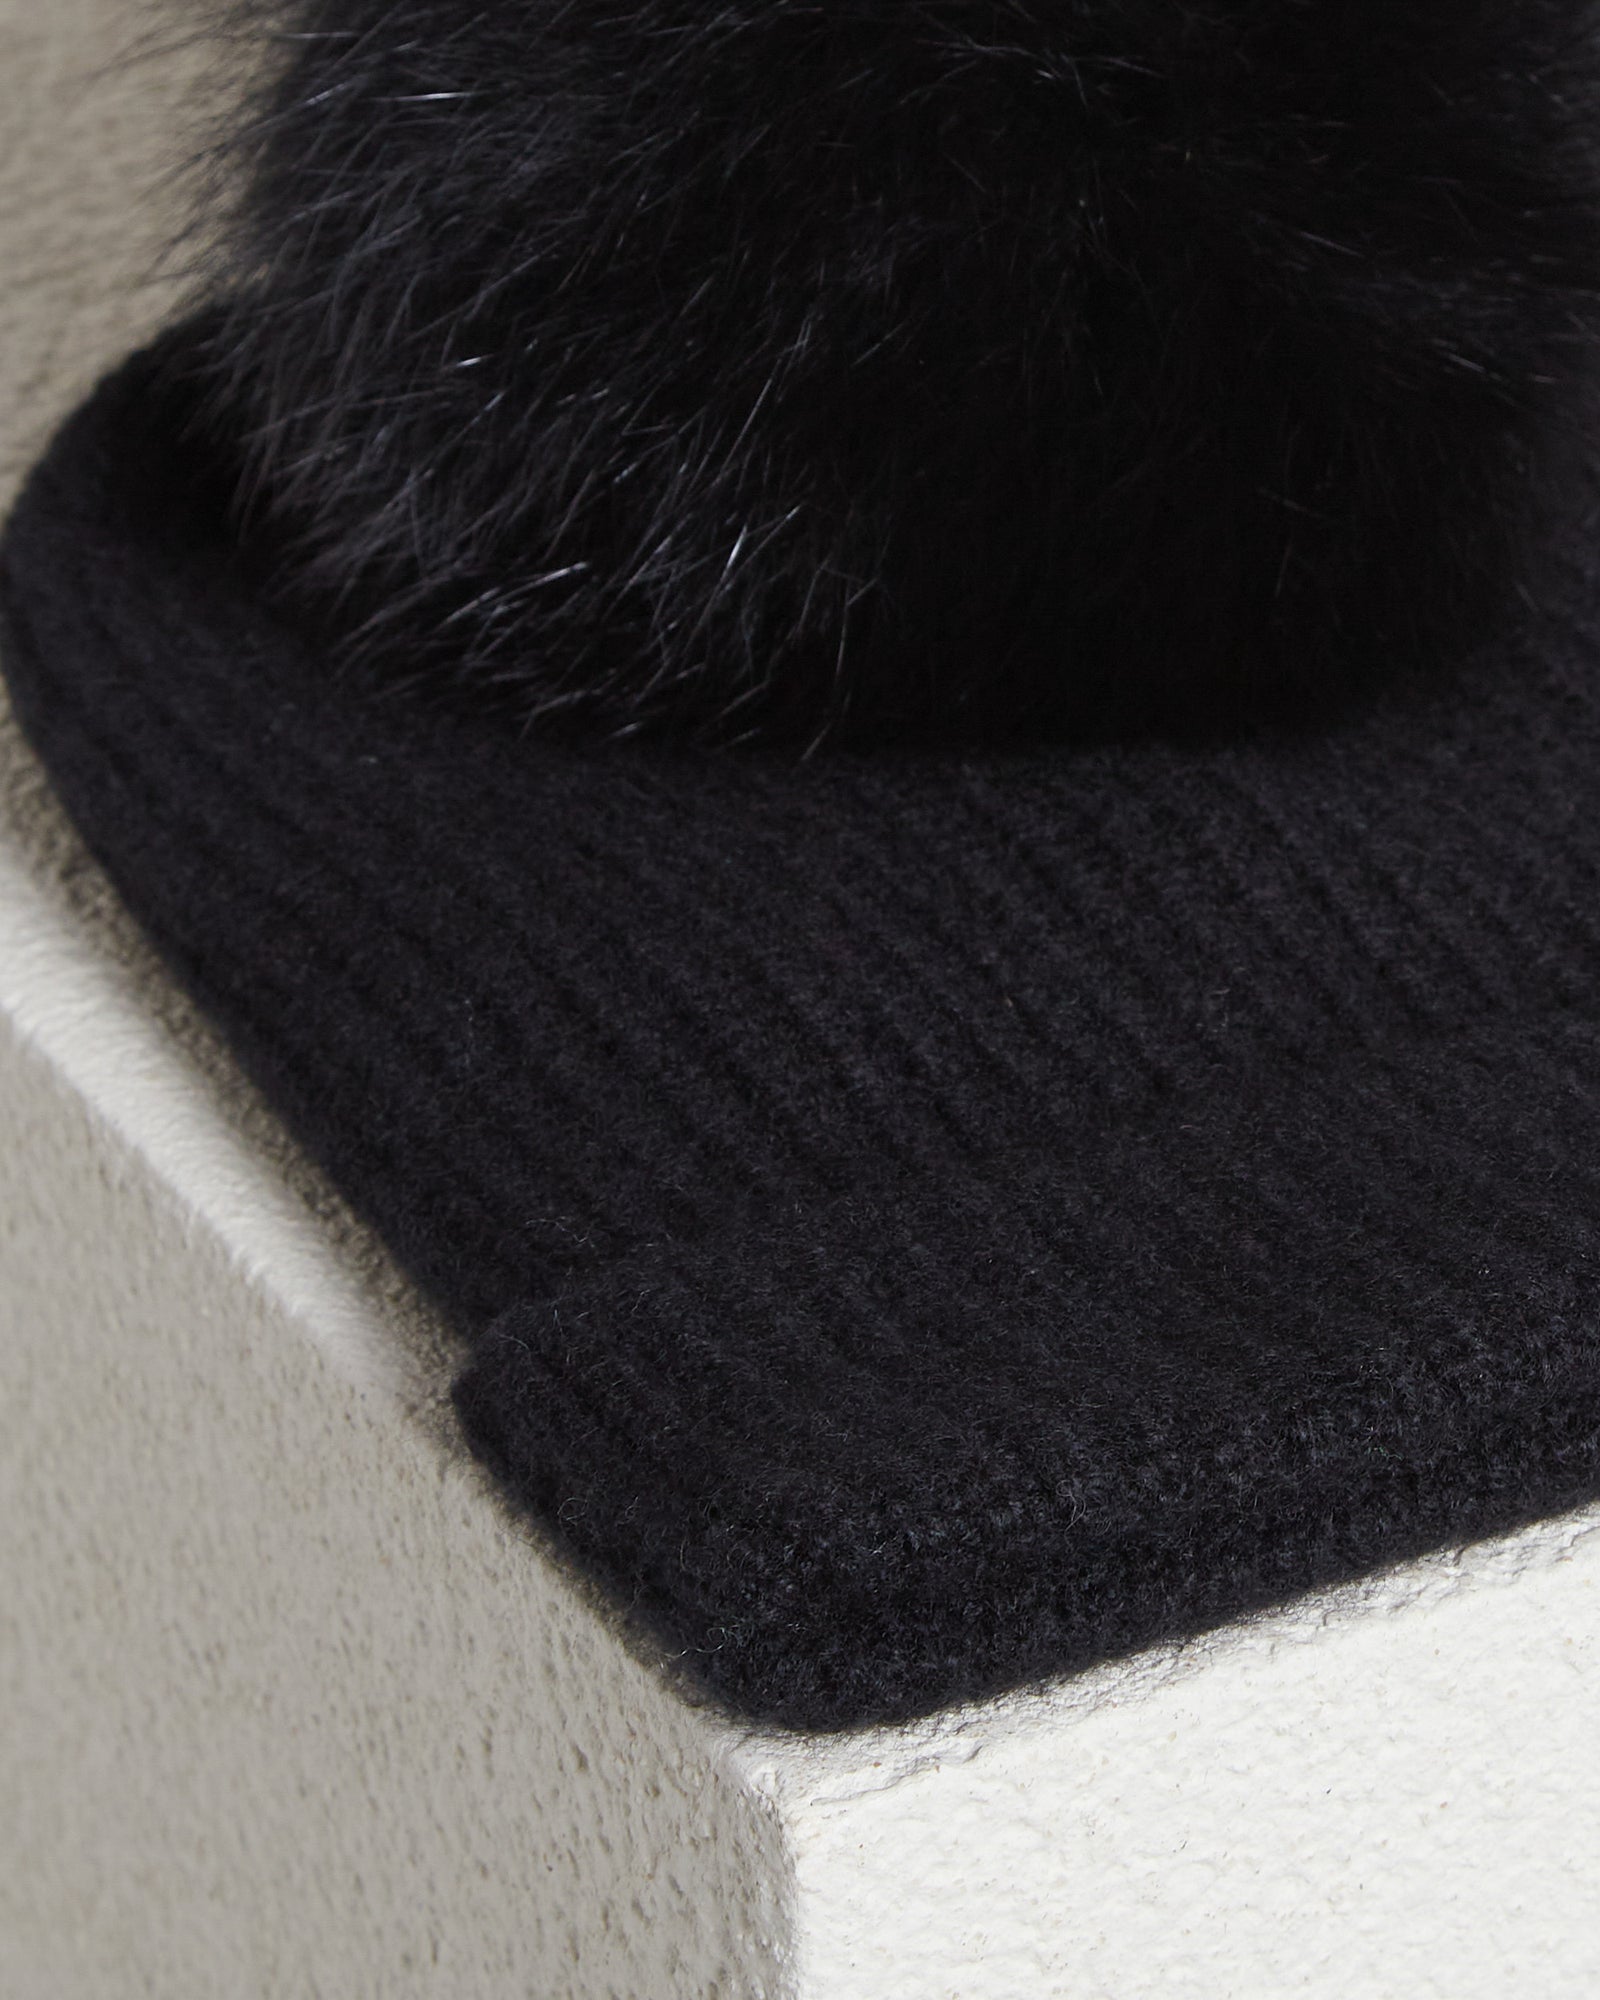 Black knitted cap with pom-pom in Kid Cashmere